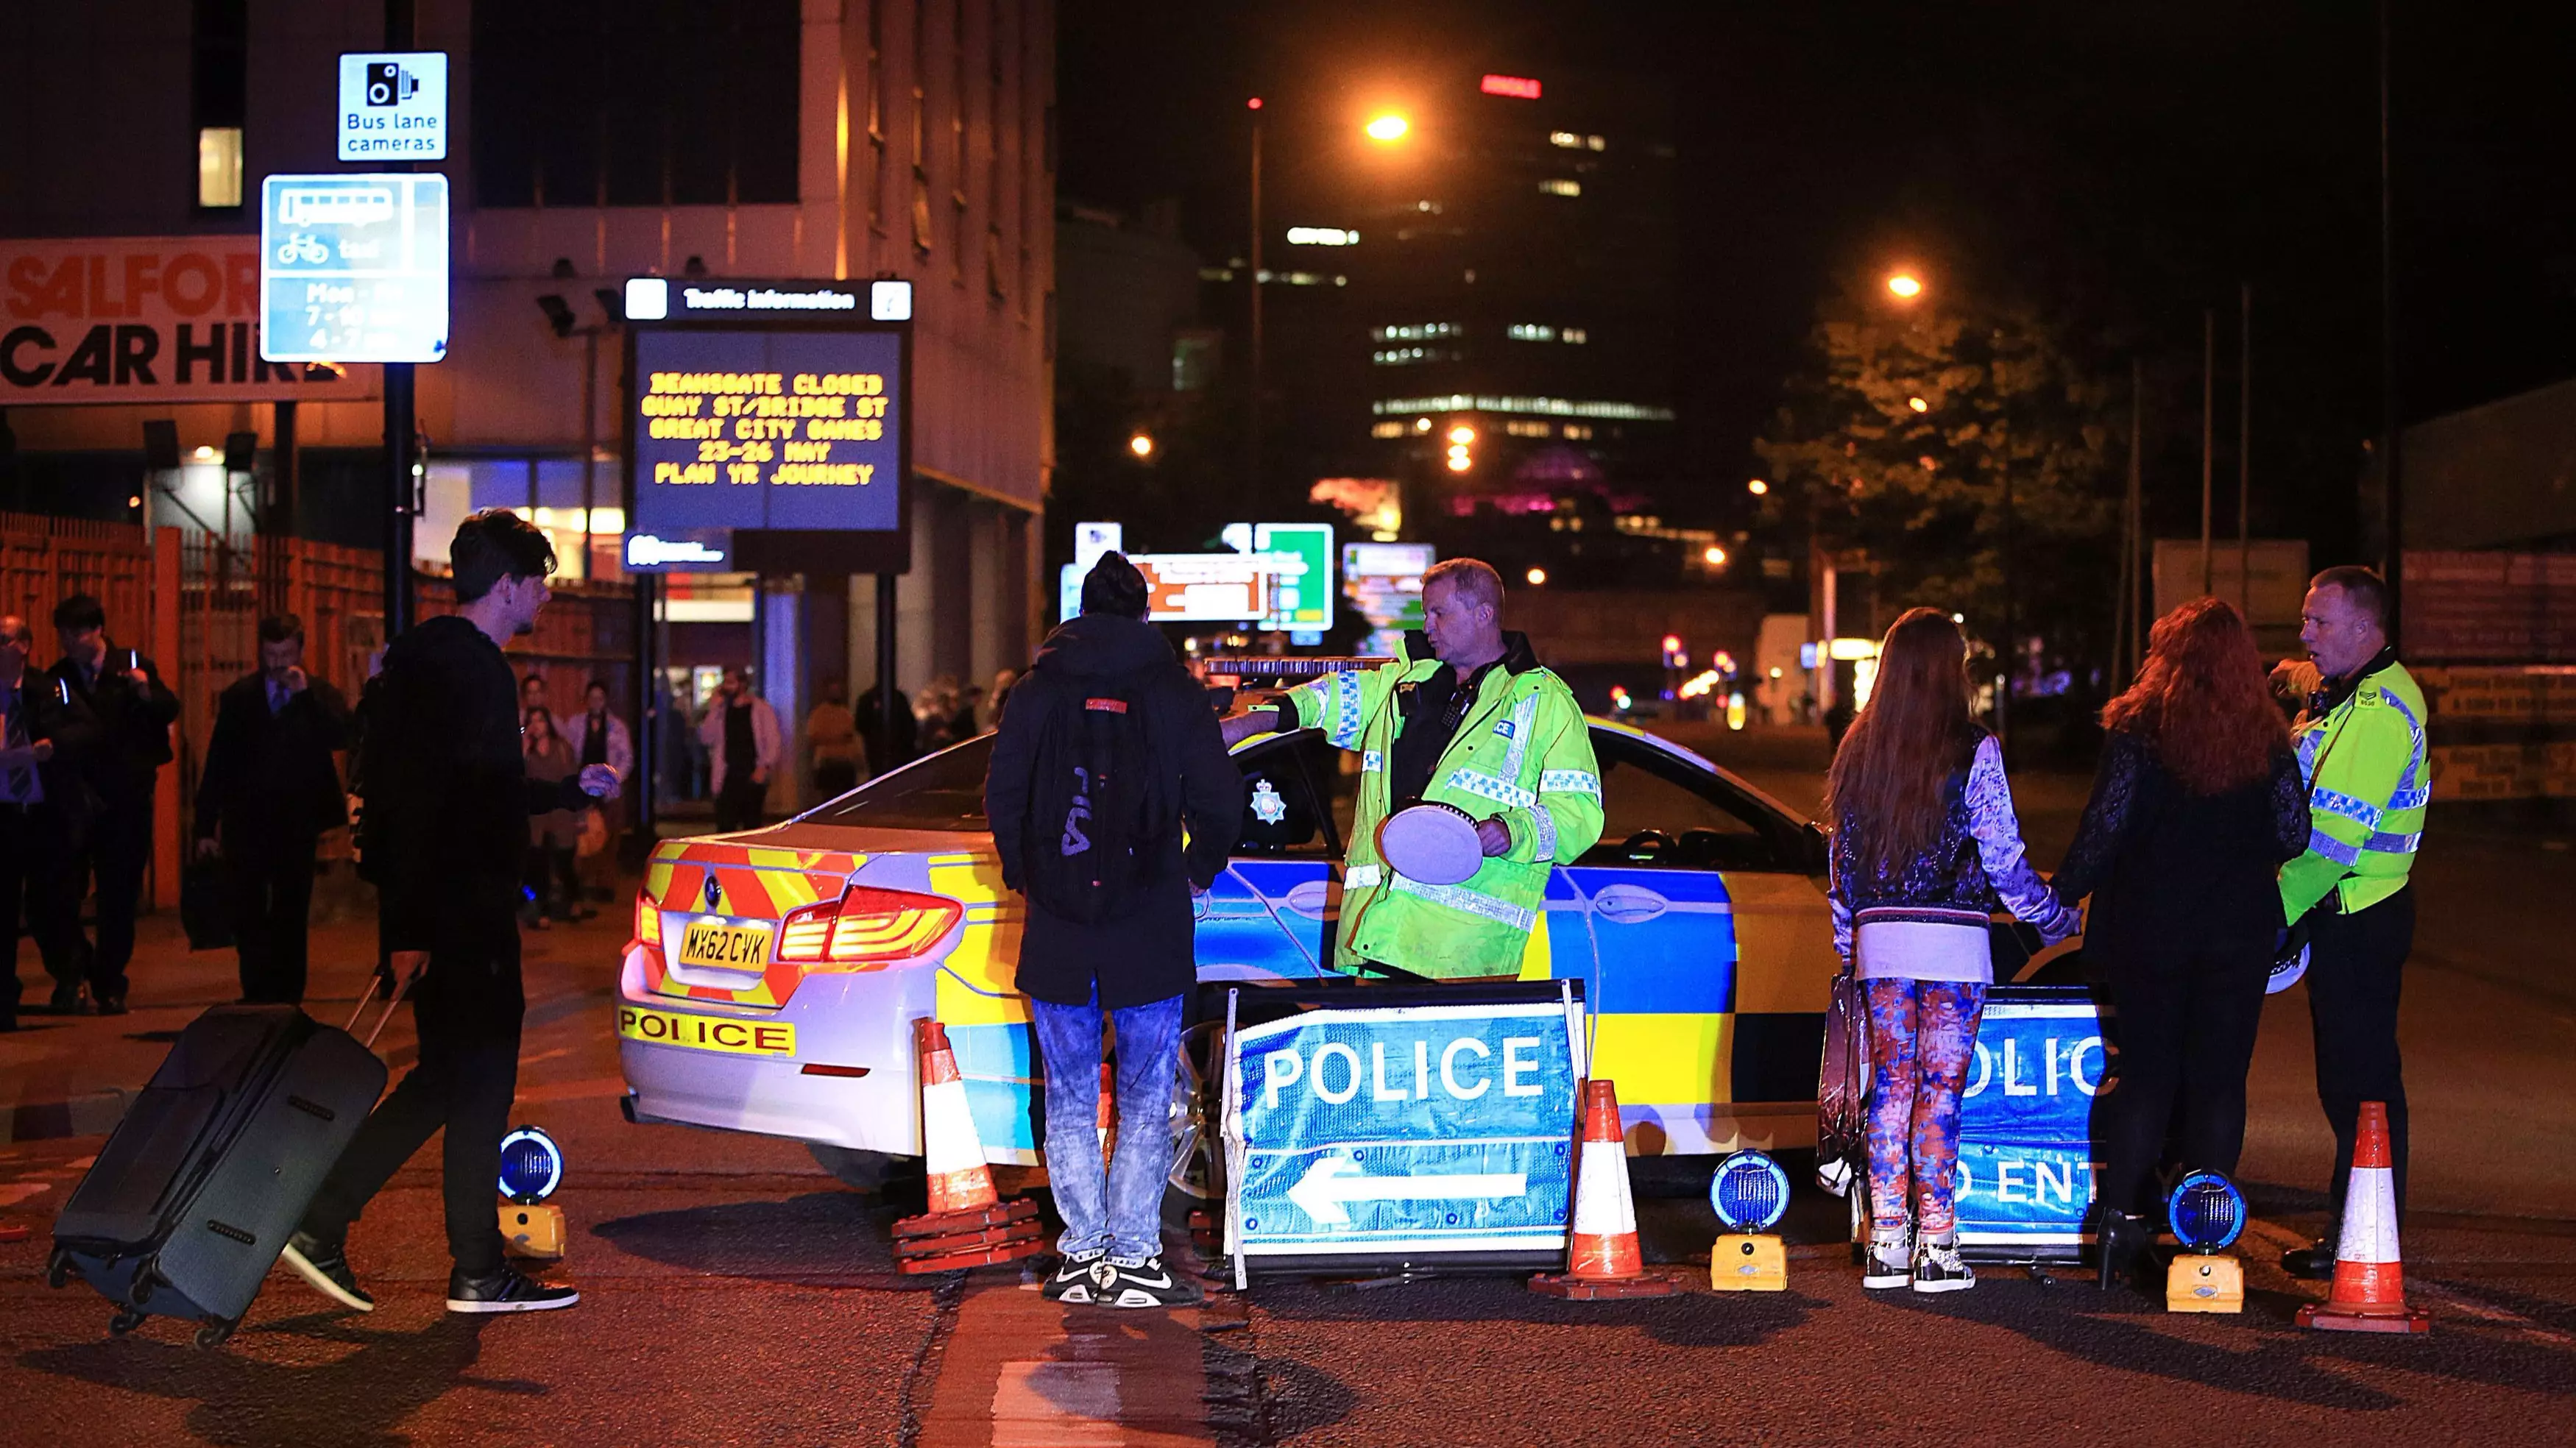 Hero Off-Duty Medics Offer To Help Out Following Manchester Attack